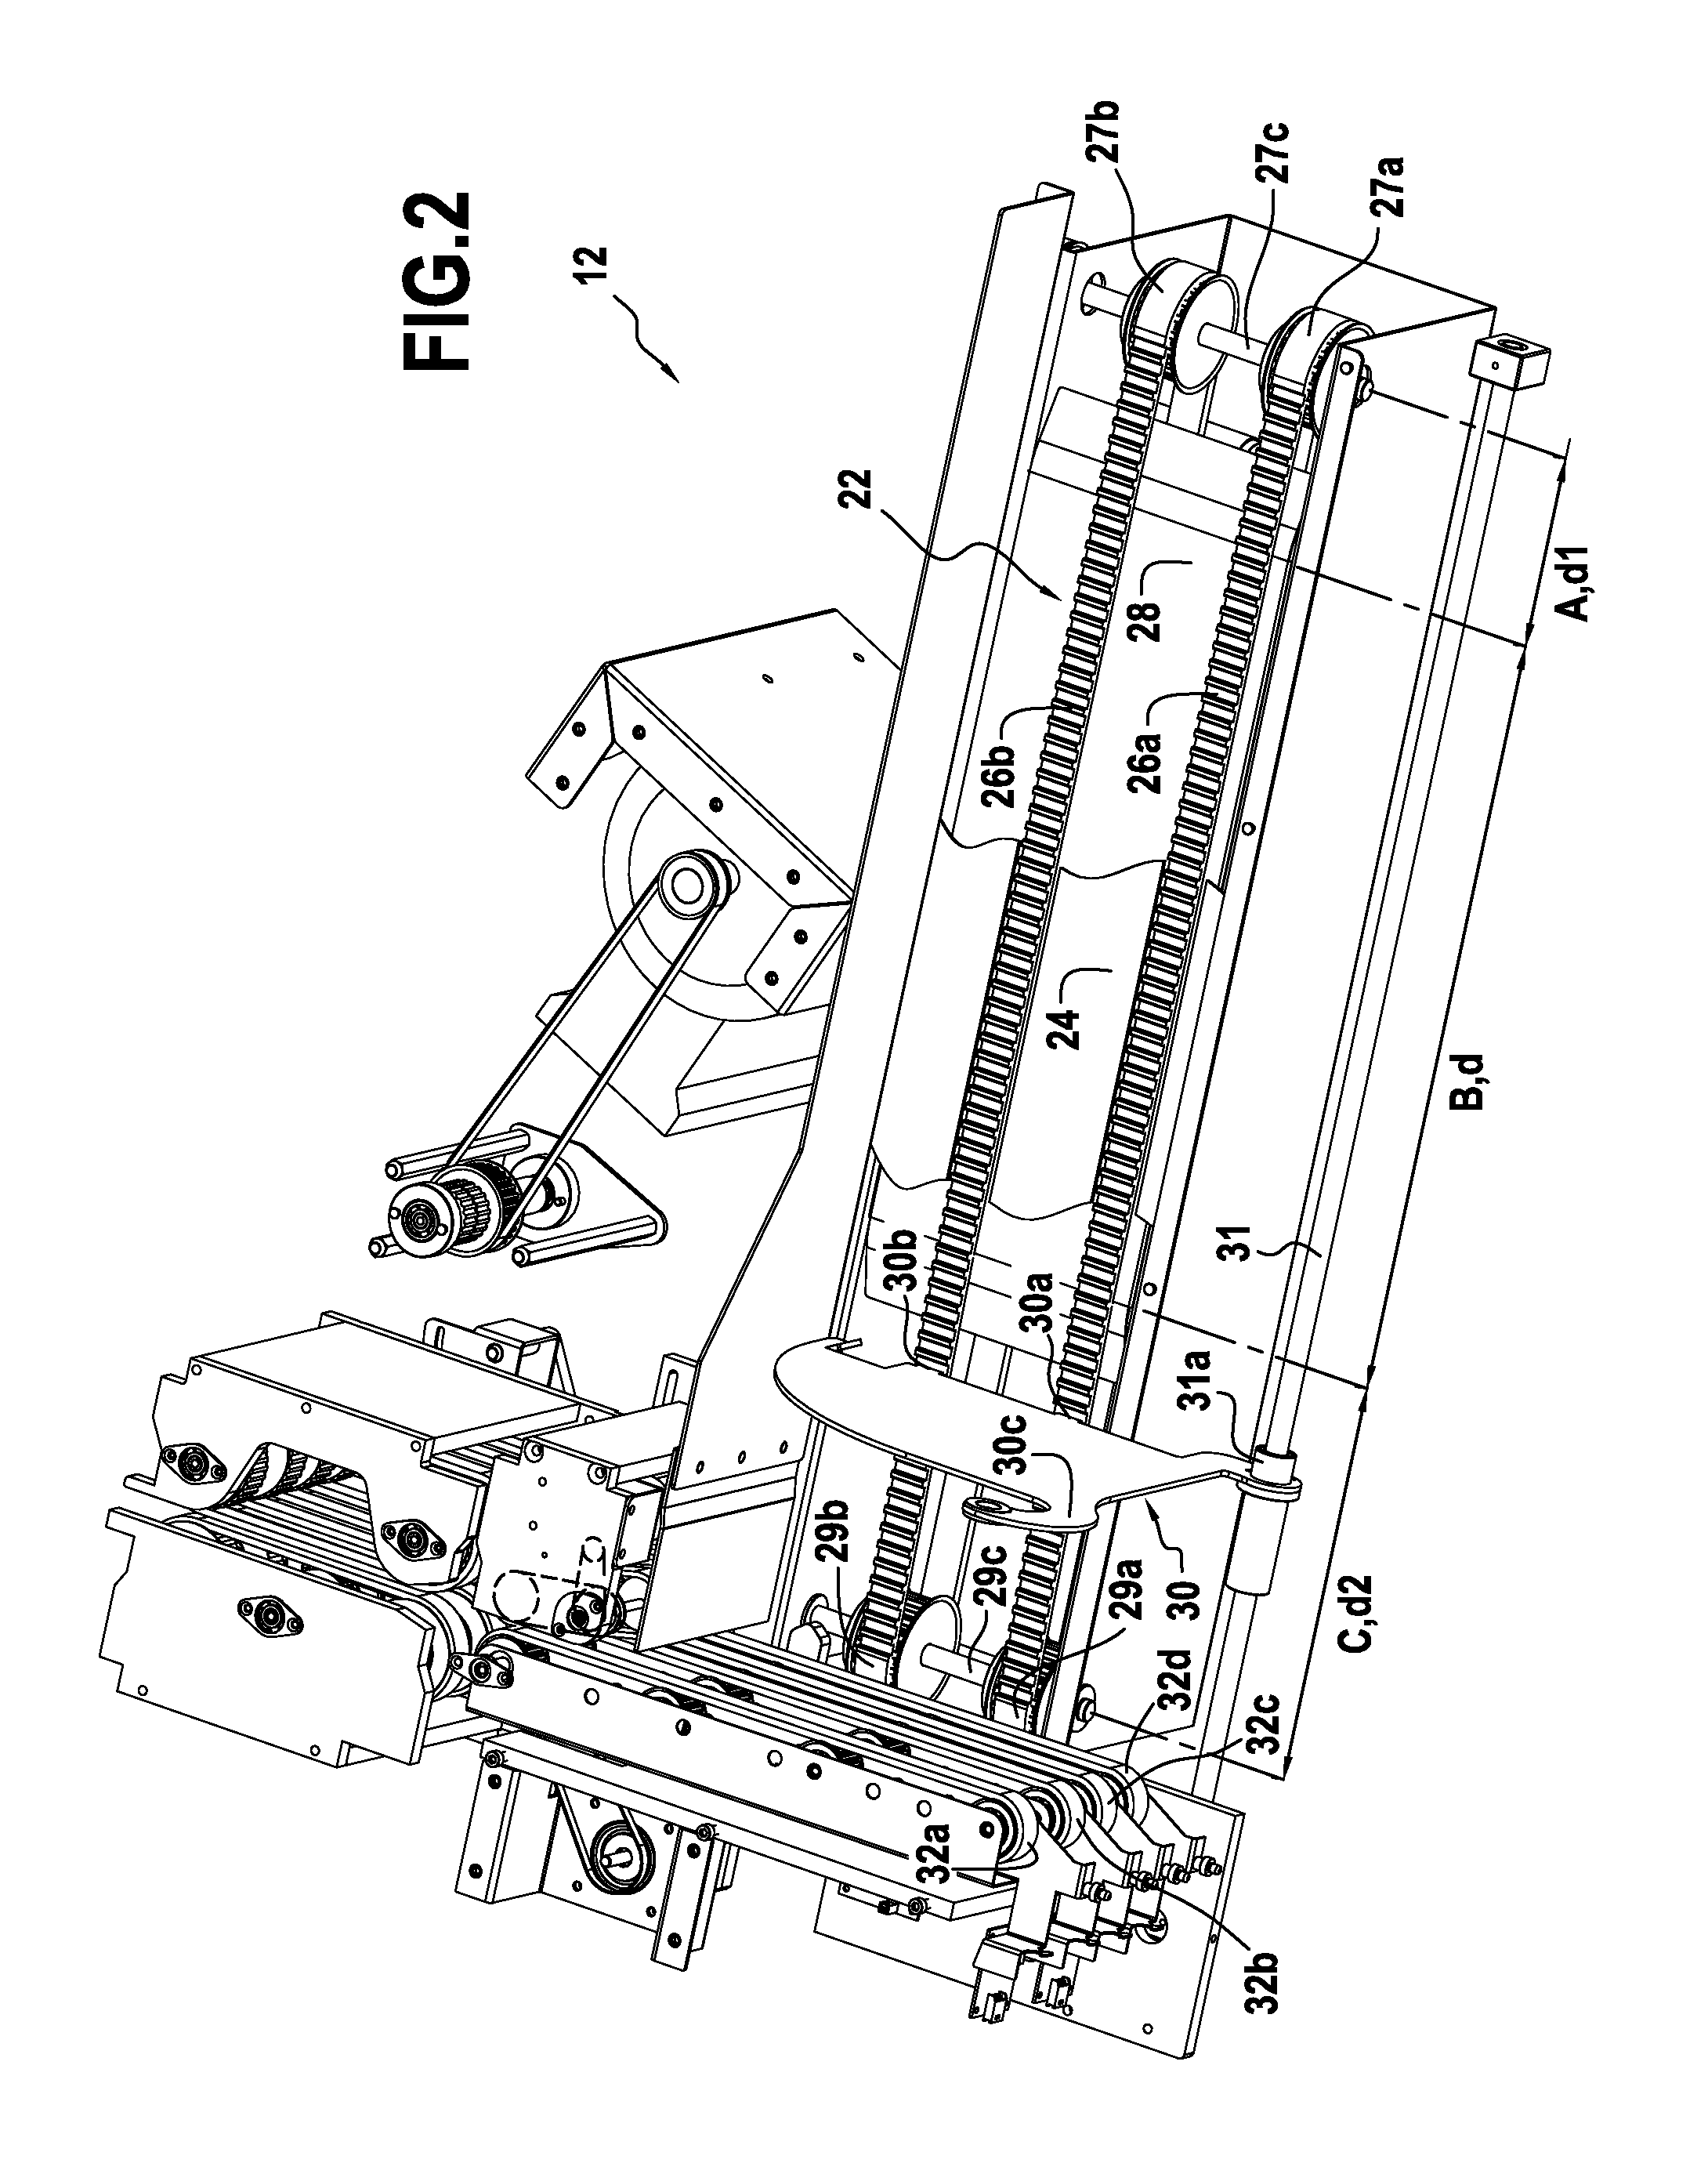 Feeding apparatus for flat items processed in a mail sorting machine with pulleys located under transport deck